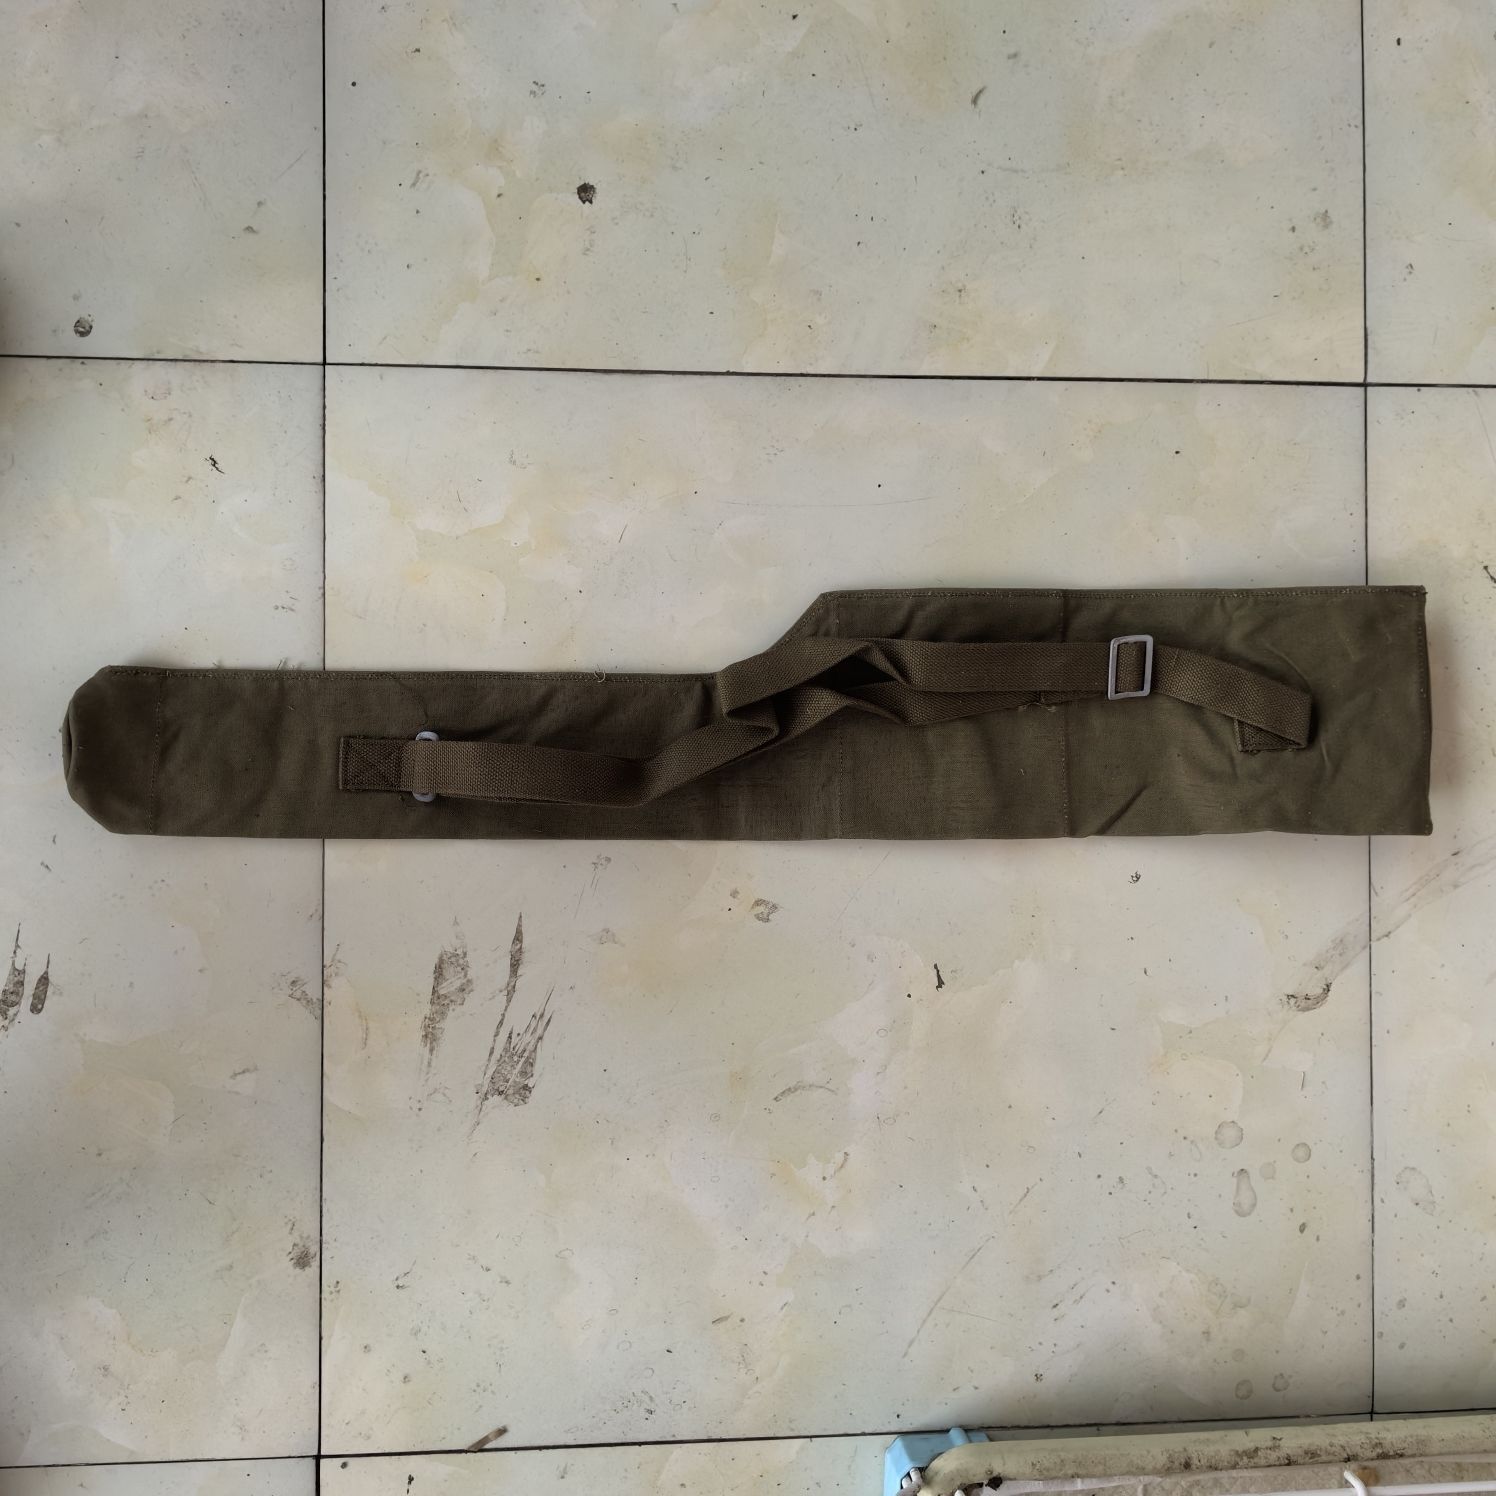 RARE Genuine Chinese SKS Army Type 56 SKS Field Bag Pouch 105cm Norinco 1970